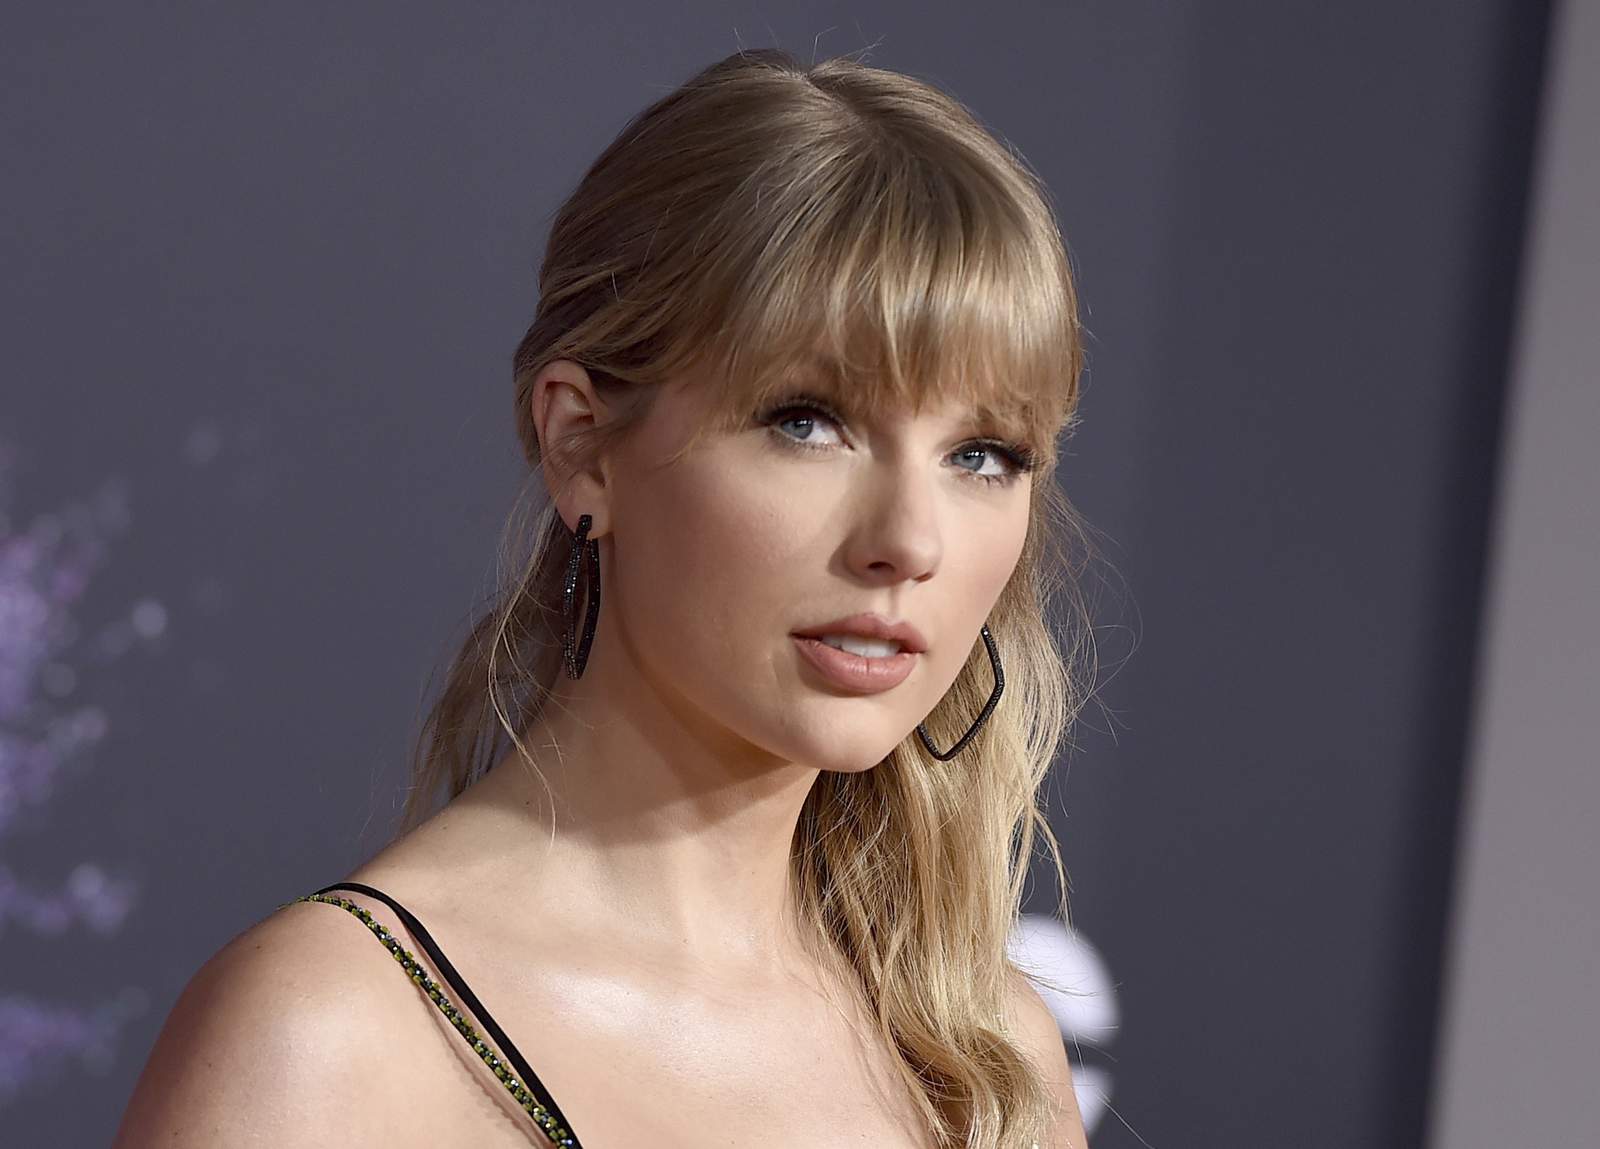 Taylor Swift has finished redoing sophomore album 'Fearless'